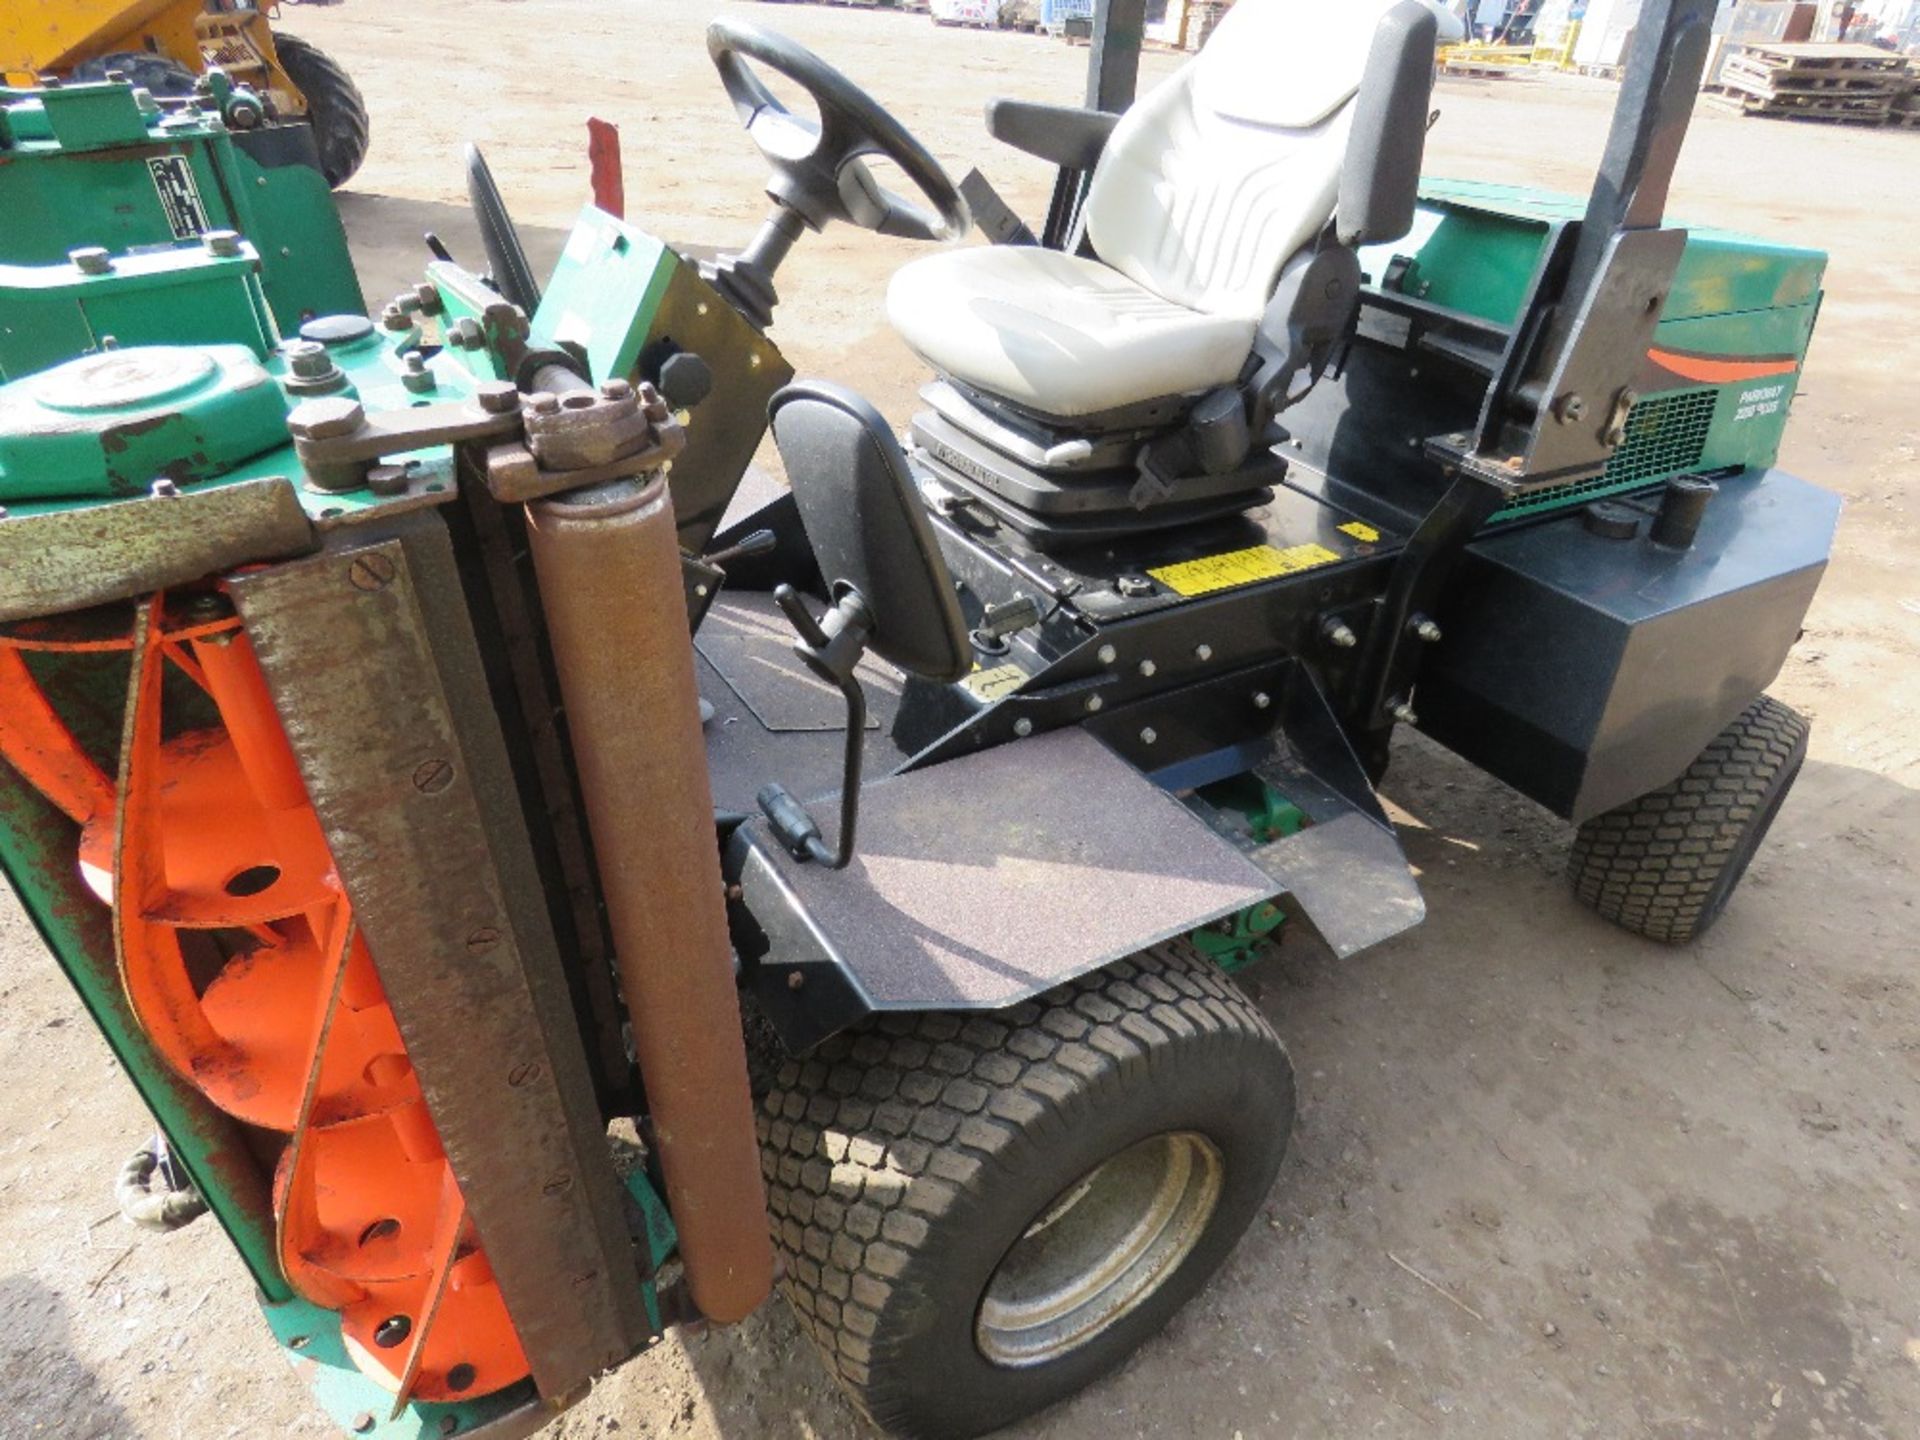 RANSOMES PARKWAY 2250 PLUS PROFESSIONAL TRIPLE RIDE ON MOWER, 4WD, 3300 REC HOURS. DIRECT FROM GOLF - Bild 6 aus 11